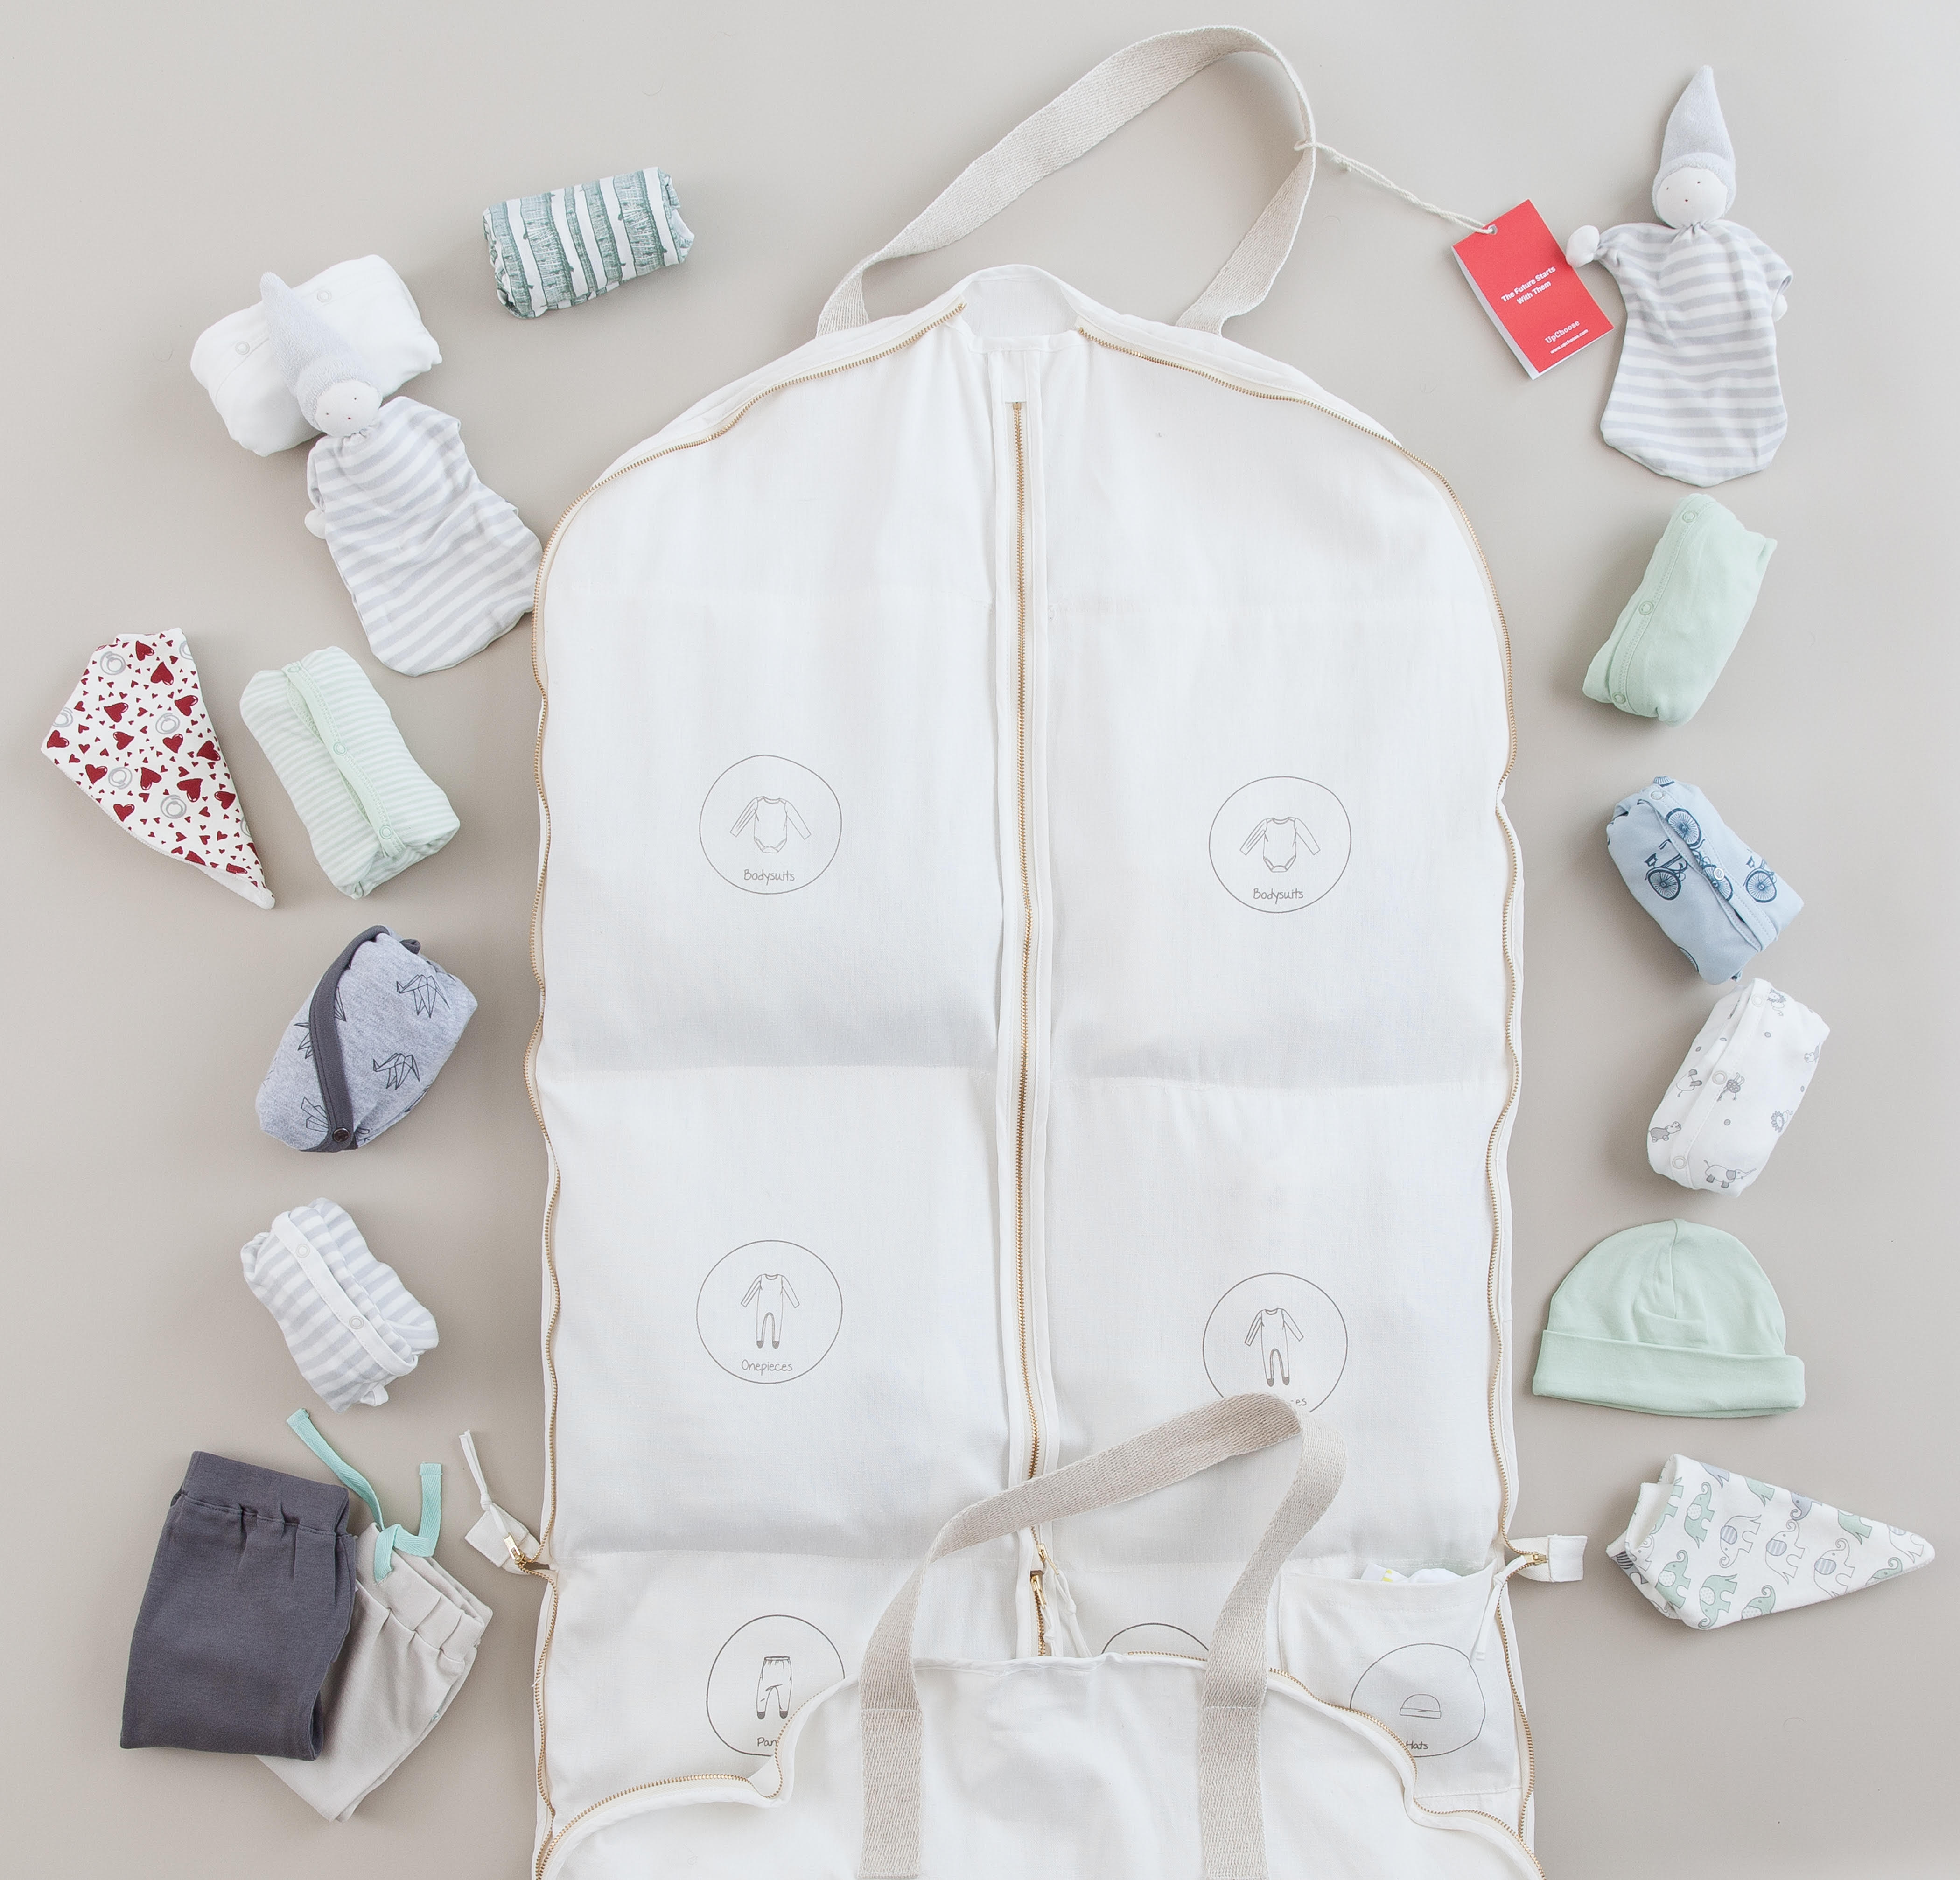 baby clothing packed into a bag